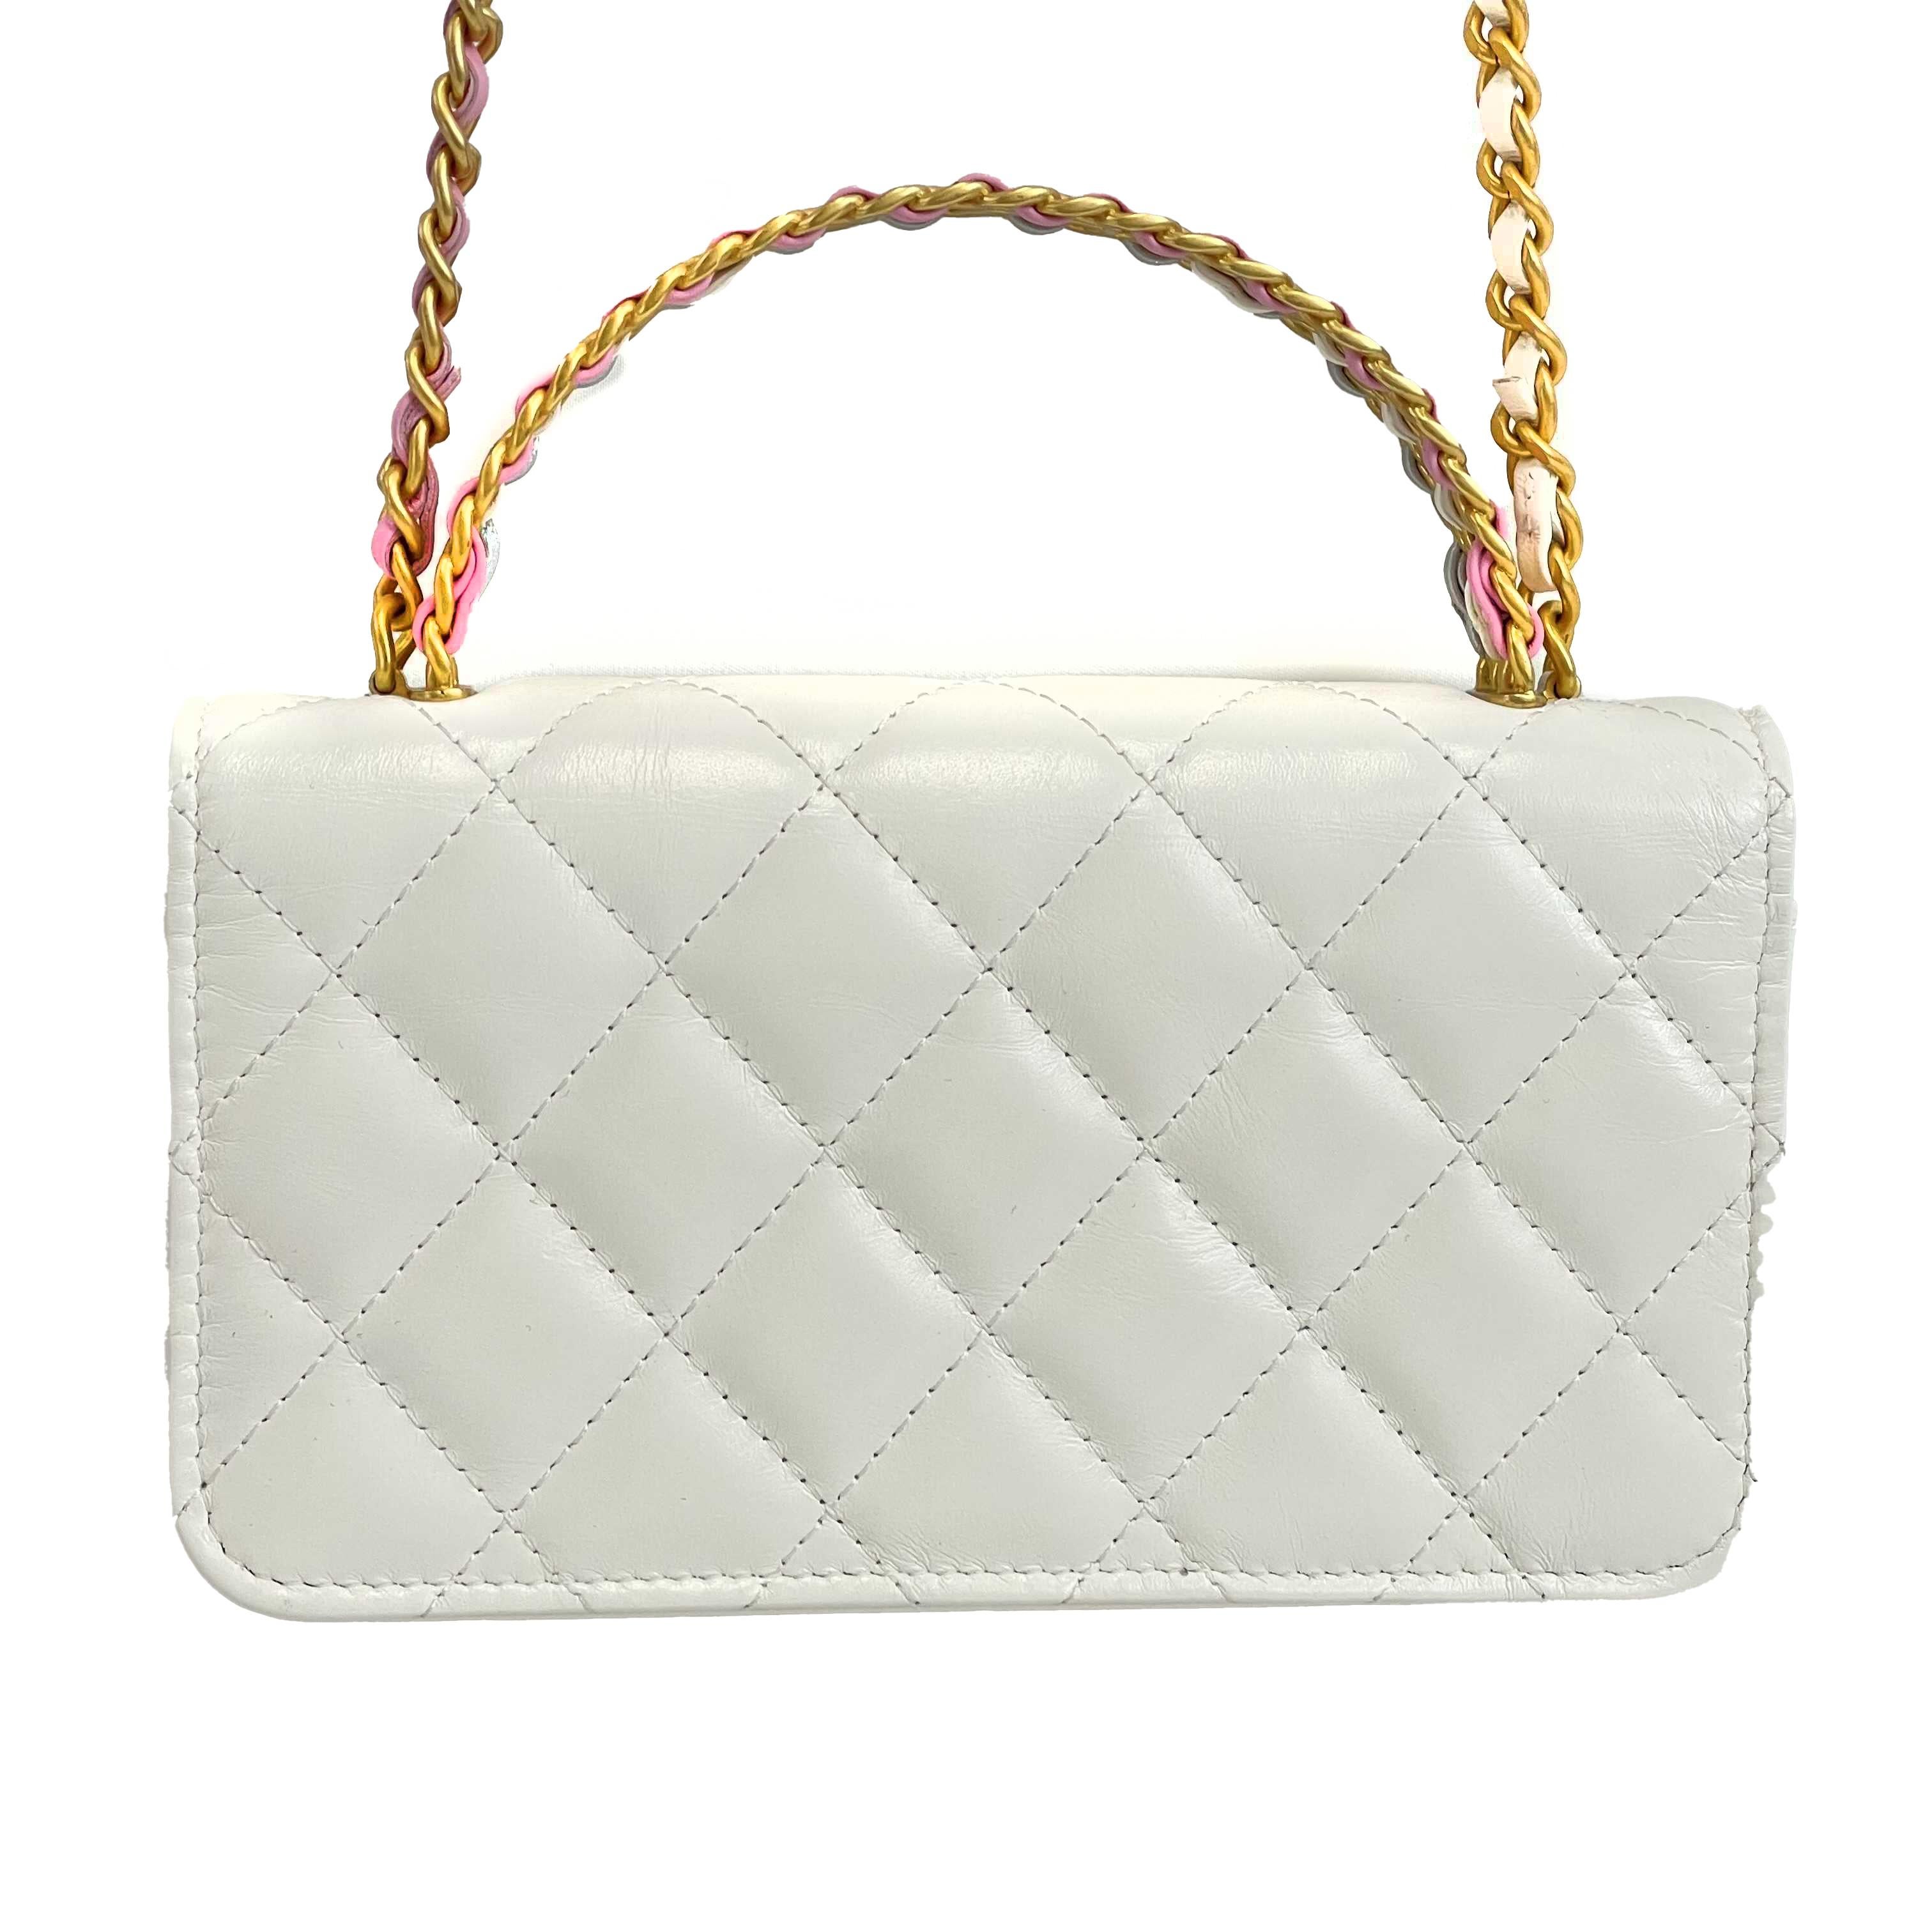 Chanel - Excellent - Small Quilted Lambskin - White, Pink, Silver - Handbag

Description

* Quilted lambskin leather
* Aged gold hardware
* Aged gold hardware handle with pink, silver, nude and white leather intertwined with CHANEL name on top
*